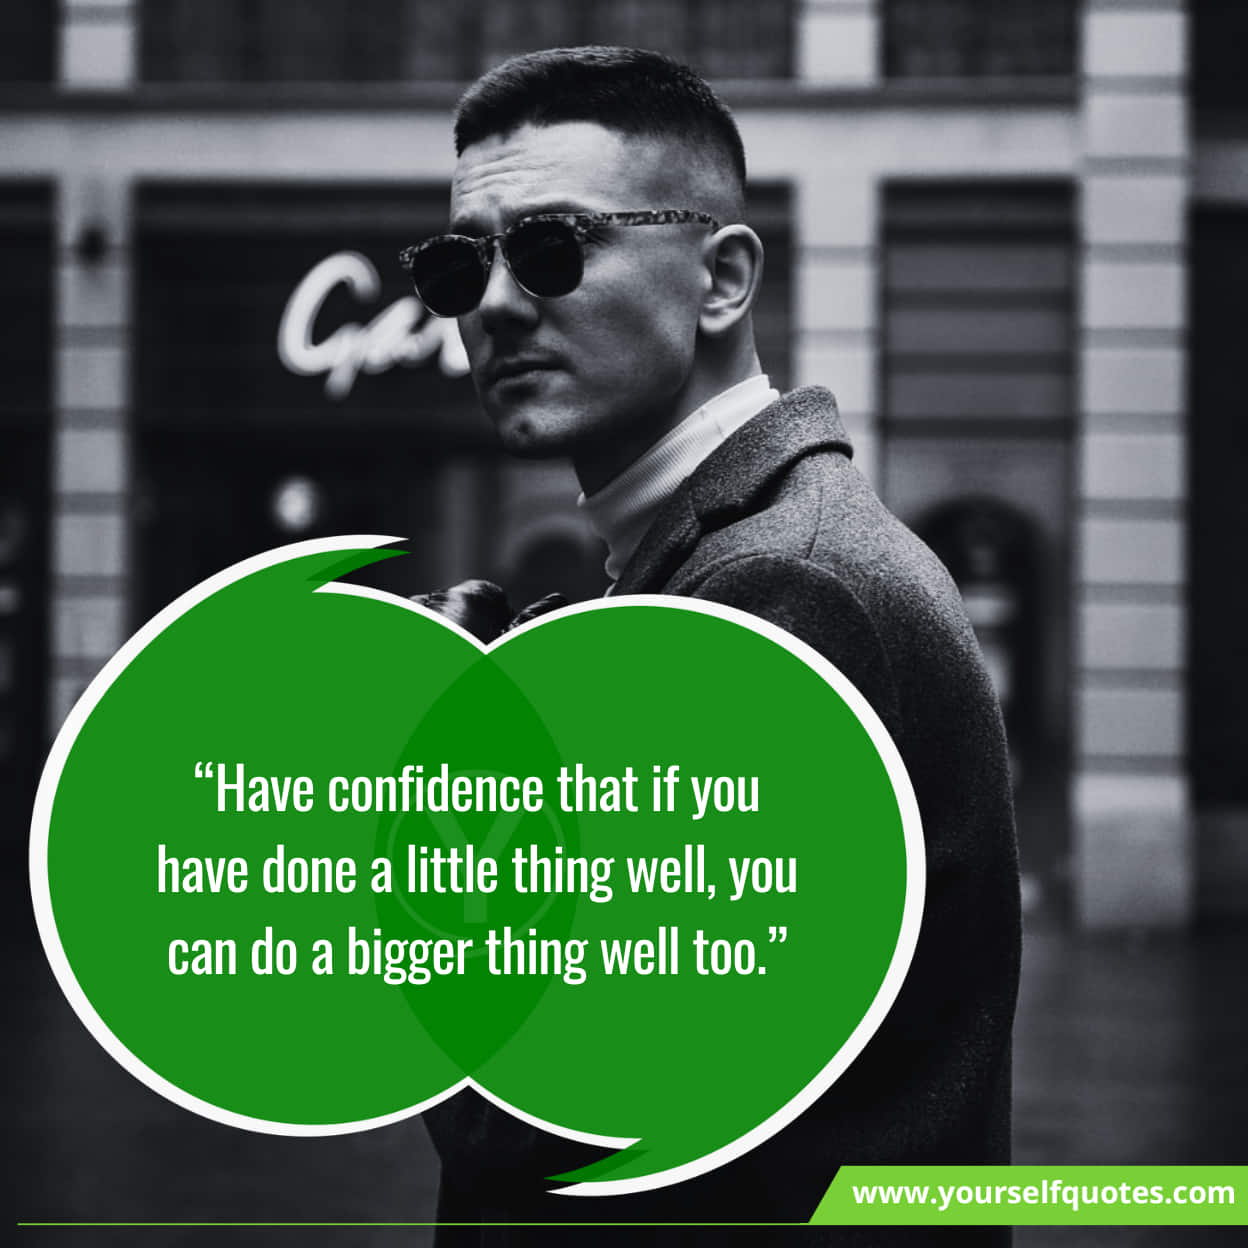 Quotes About Exciting Self-Confidence Quotes For Growth